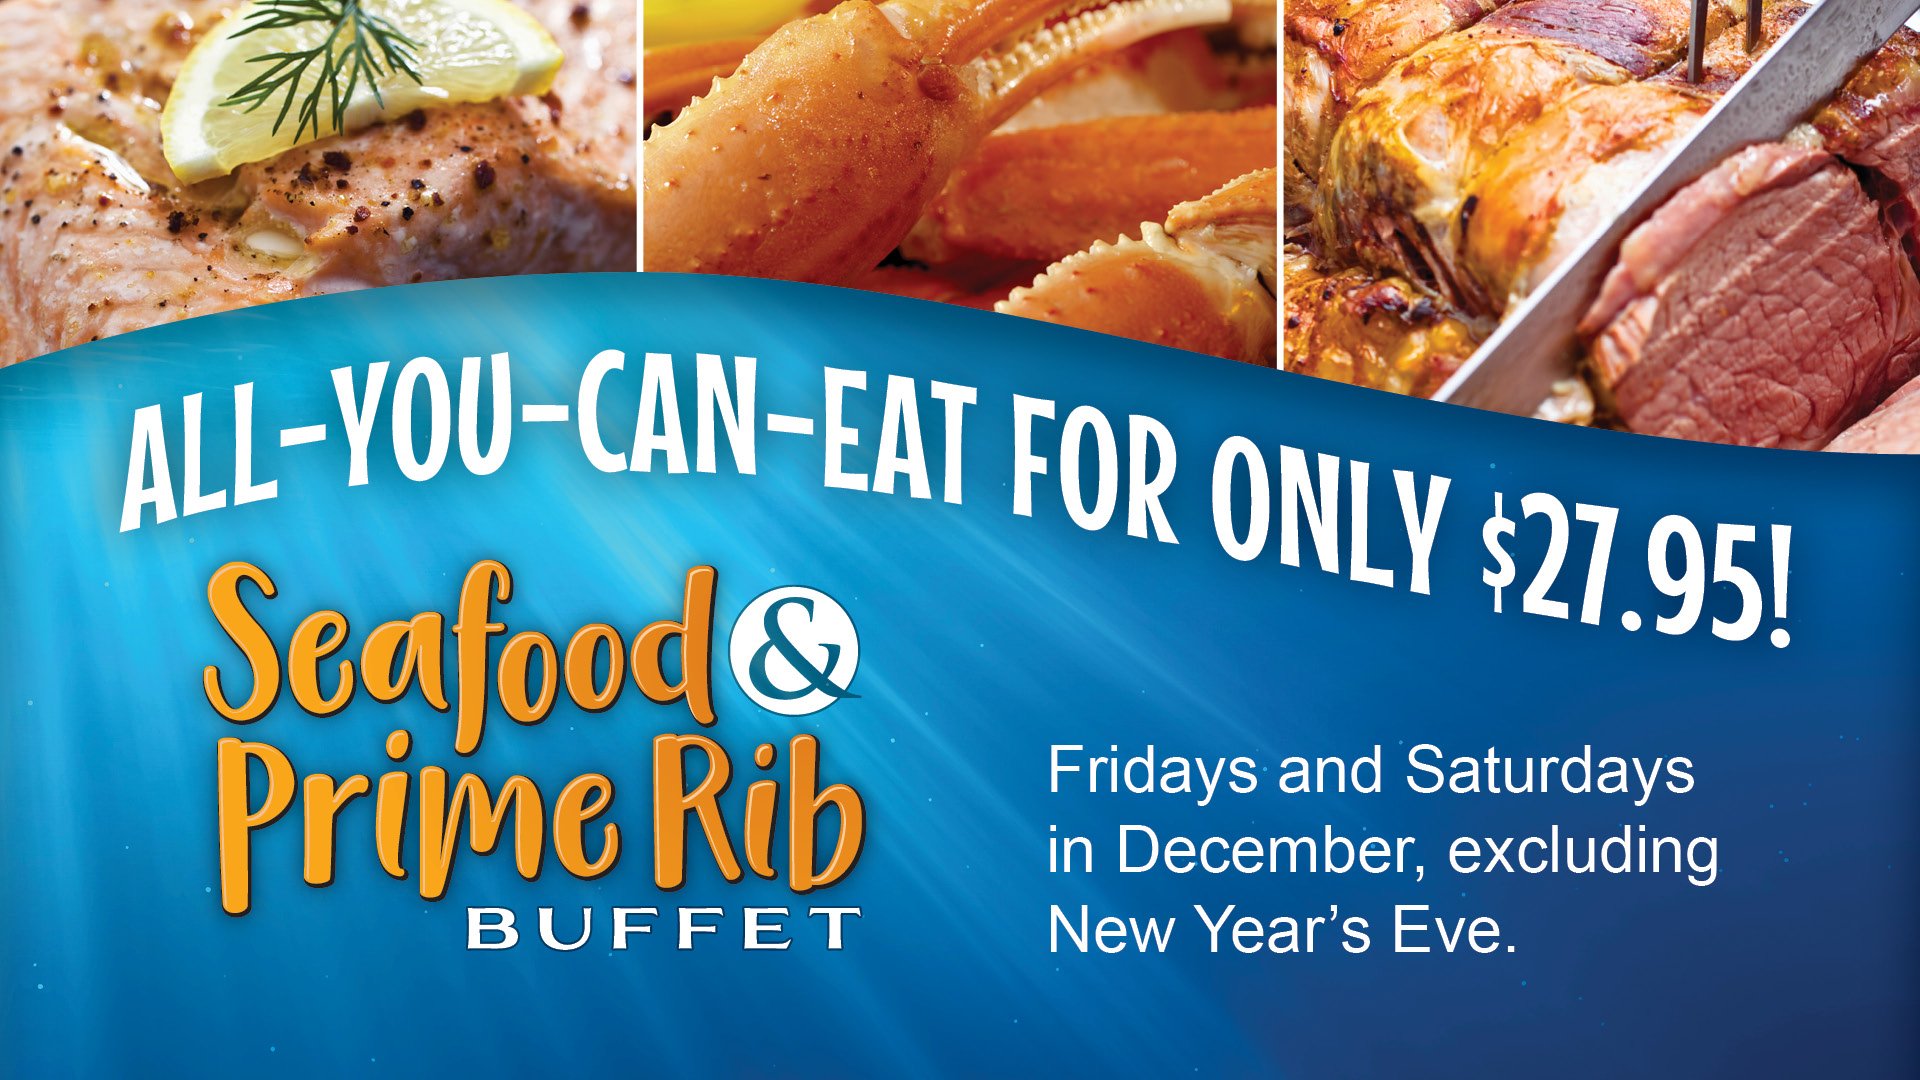 Seafood & Prime Rib Buffet for $27.95